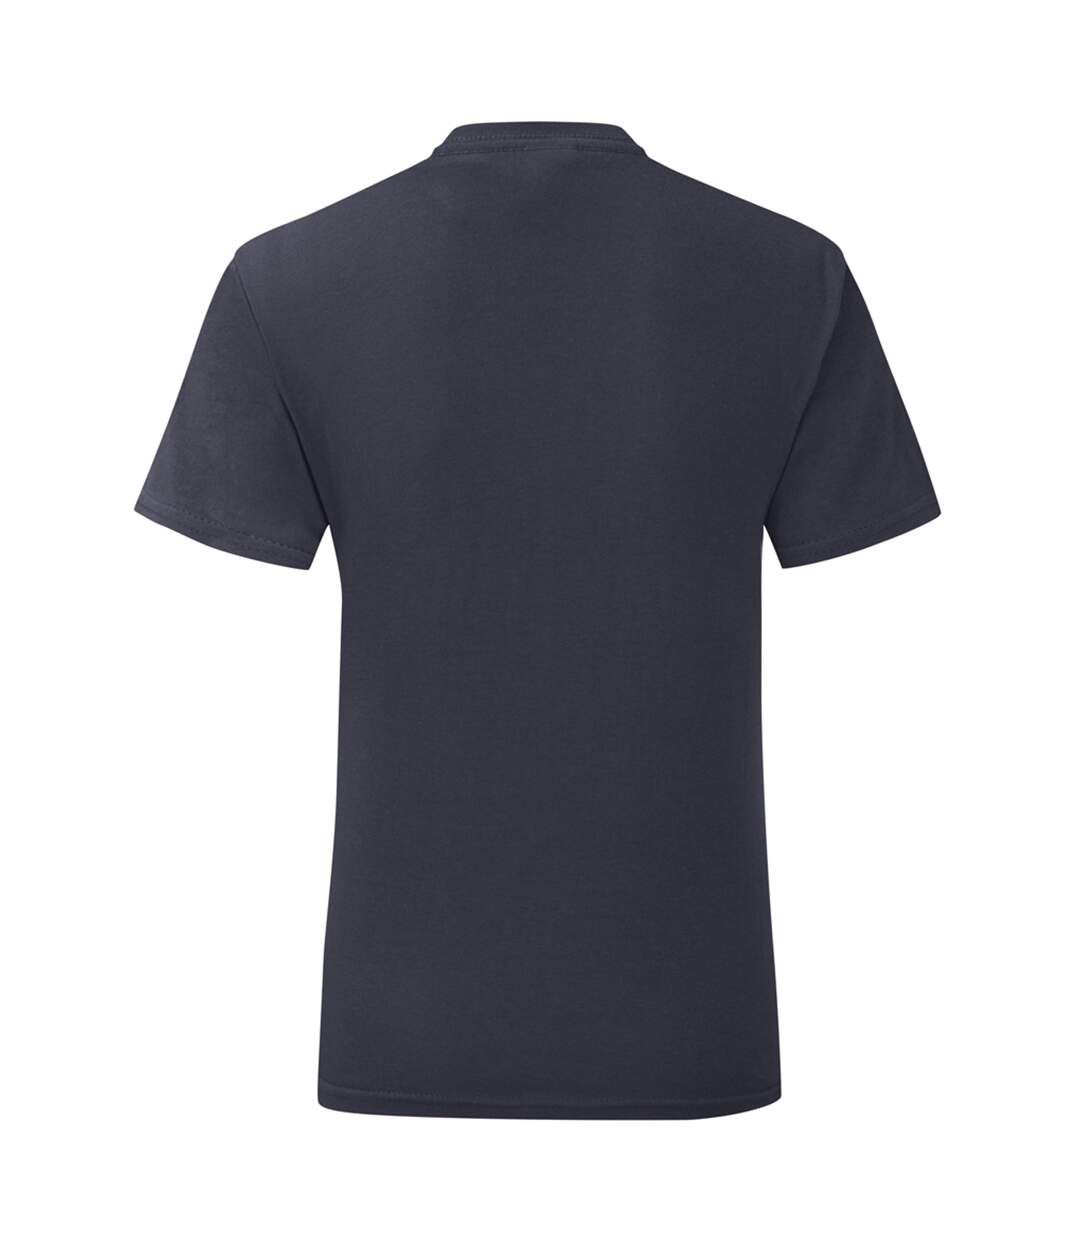 Fruit Of The Loom Mens Iconic T-Shirt (Pack Of 5) (Deep Navy) - UTPC4369